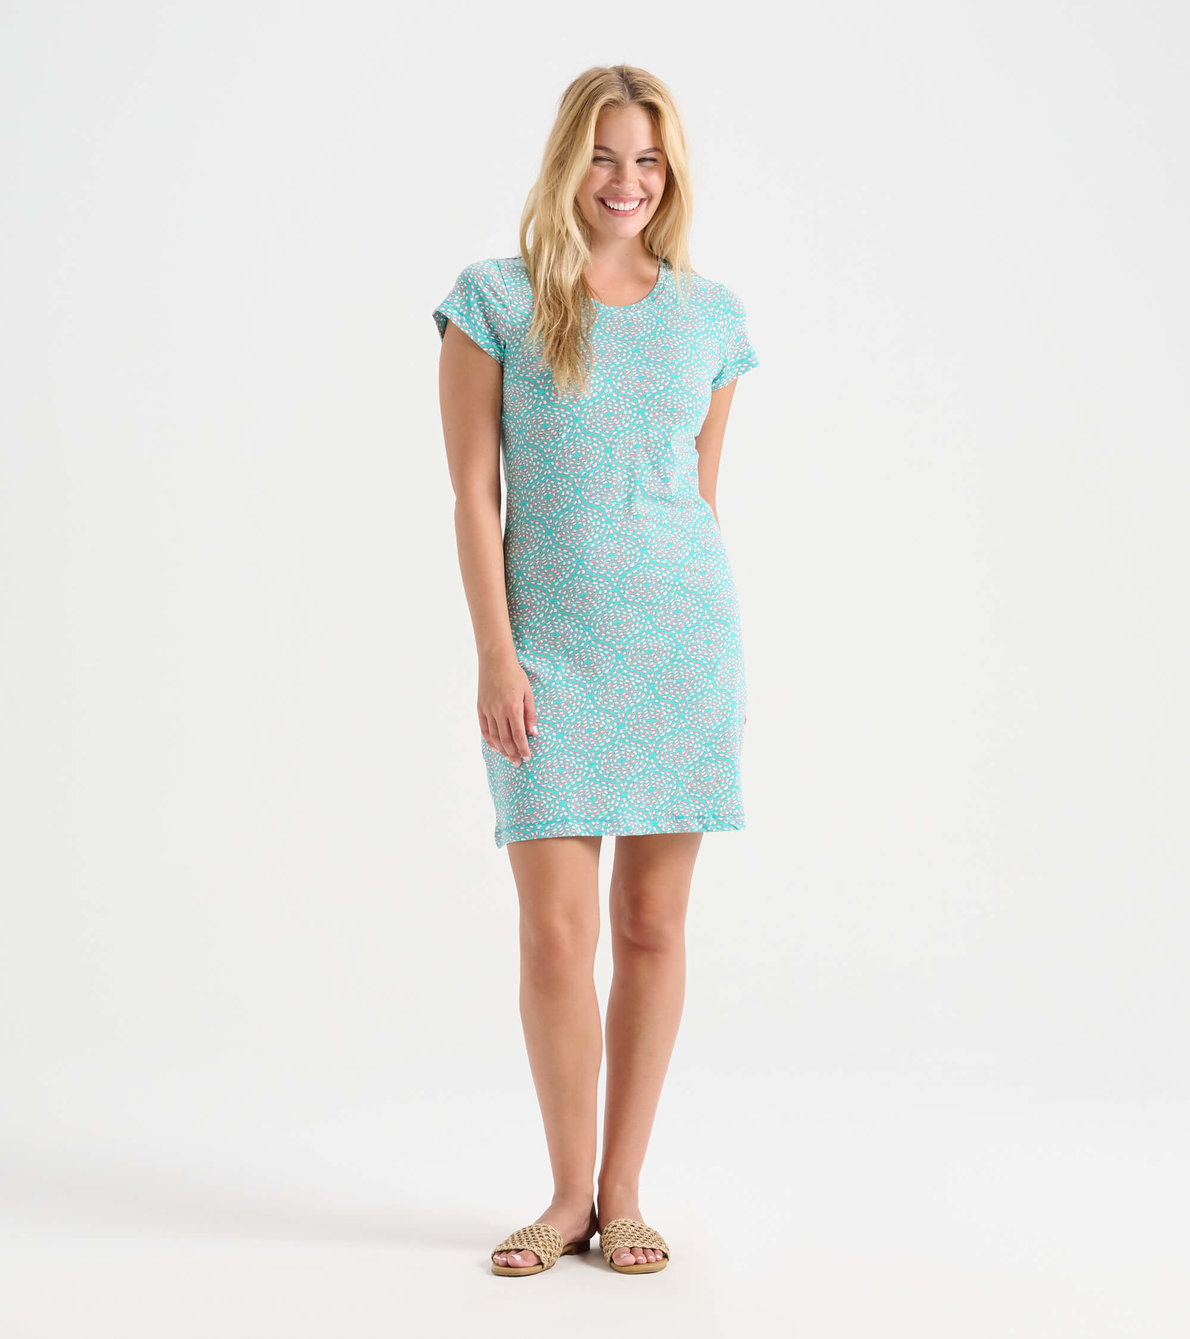 View larger image of Women's Skipped Stones Crew Neck Tee Dress